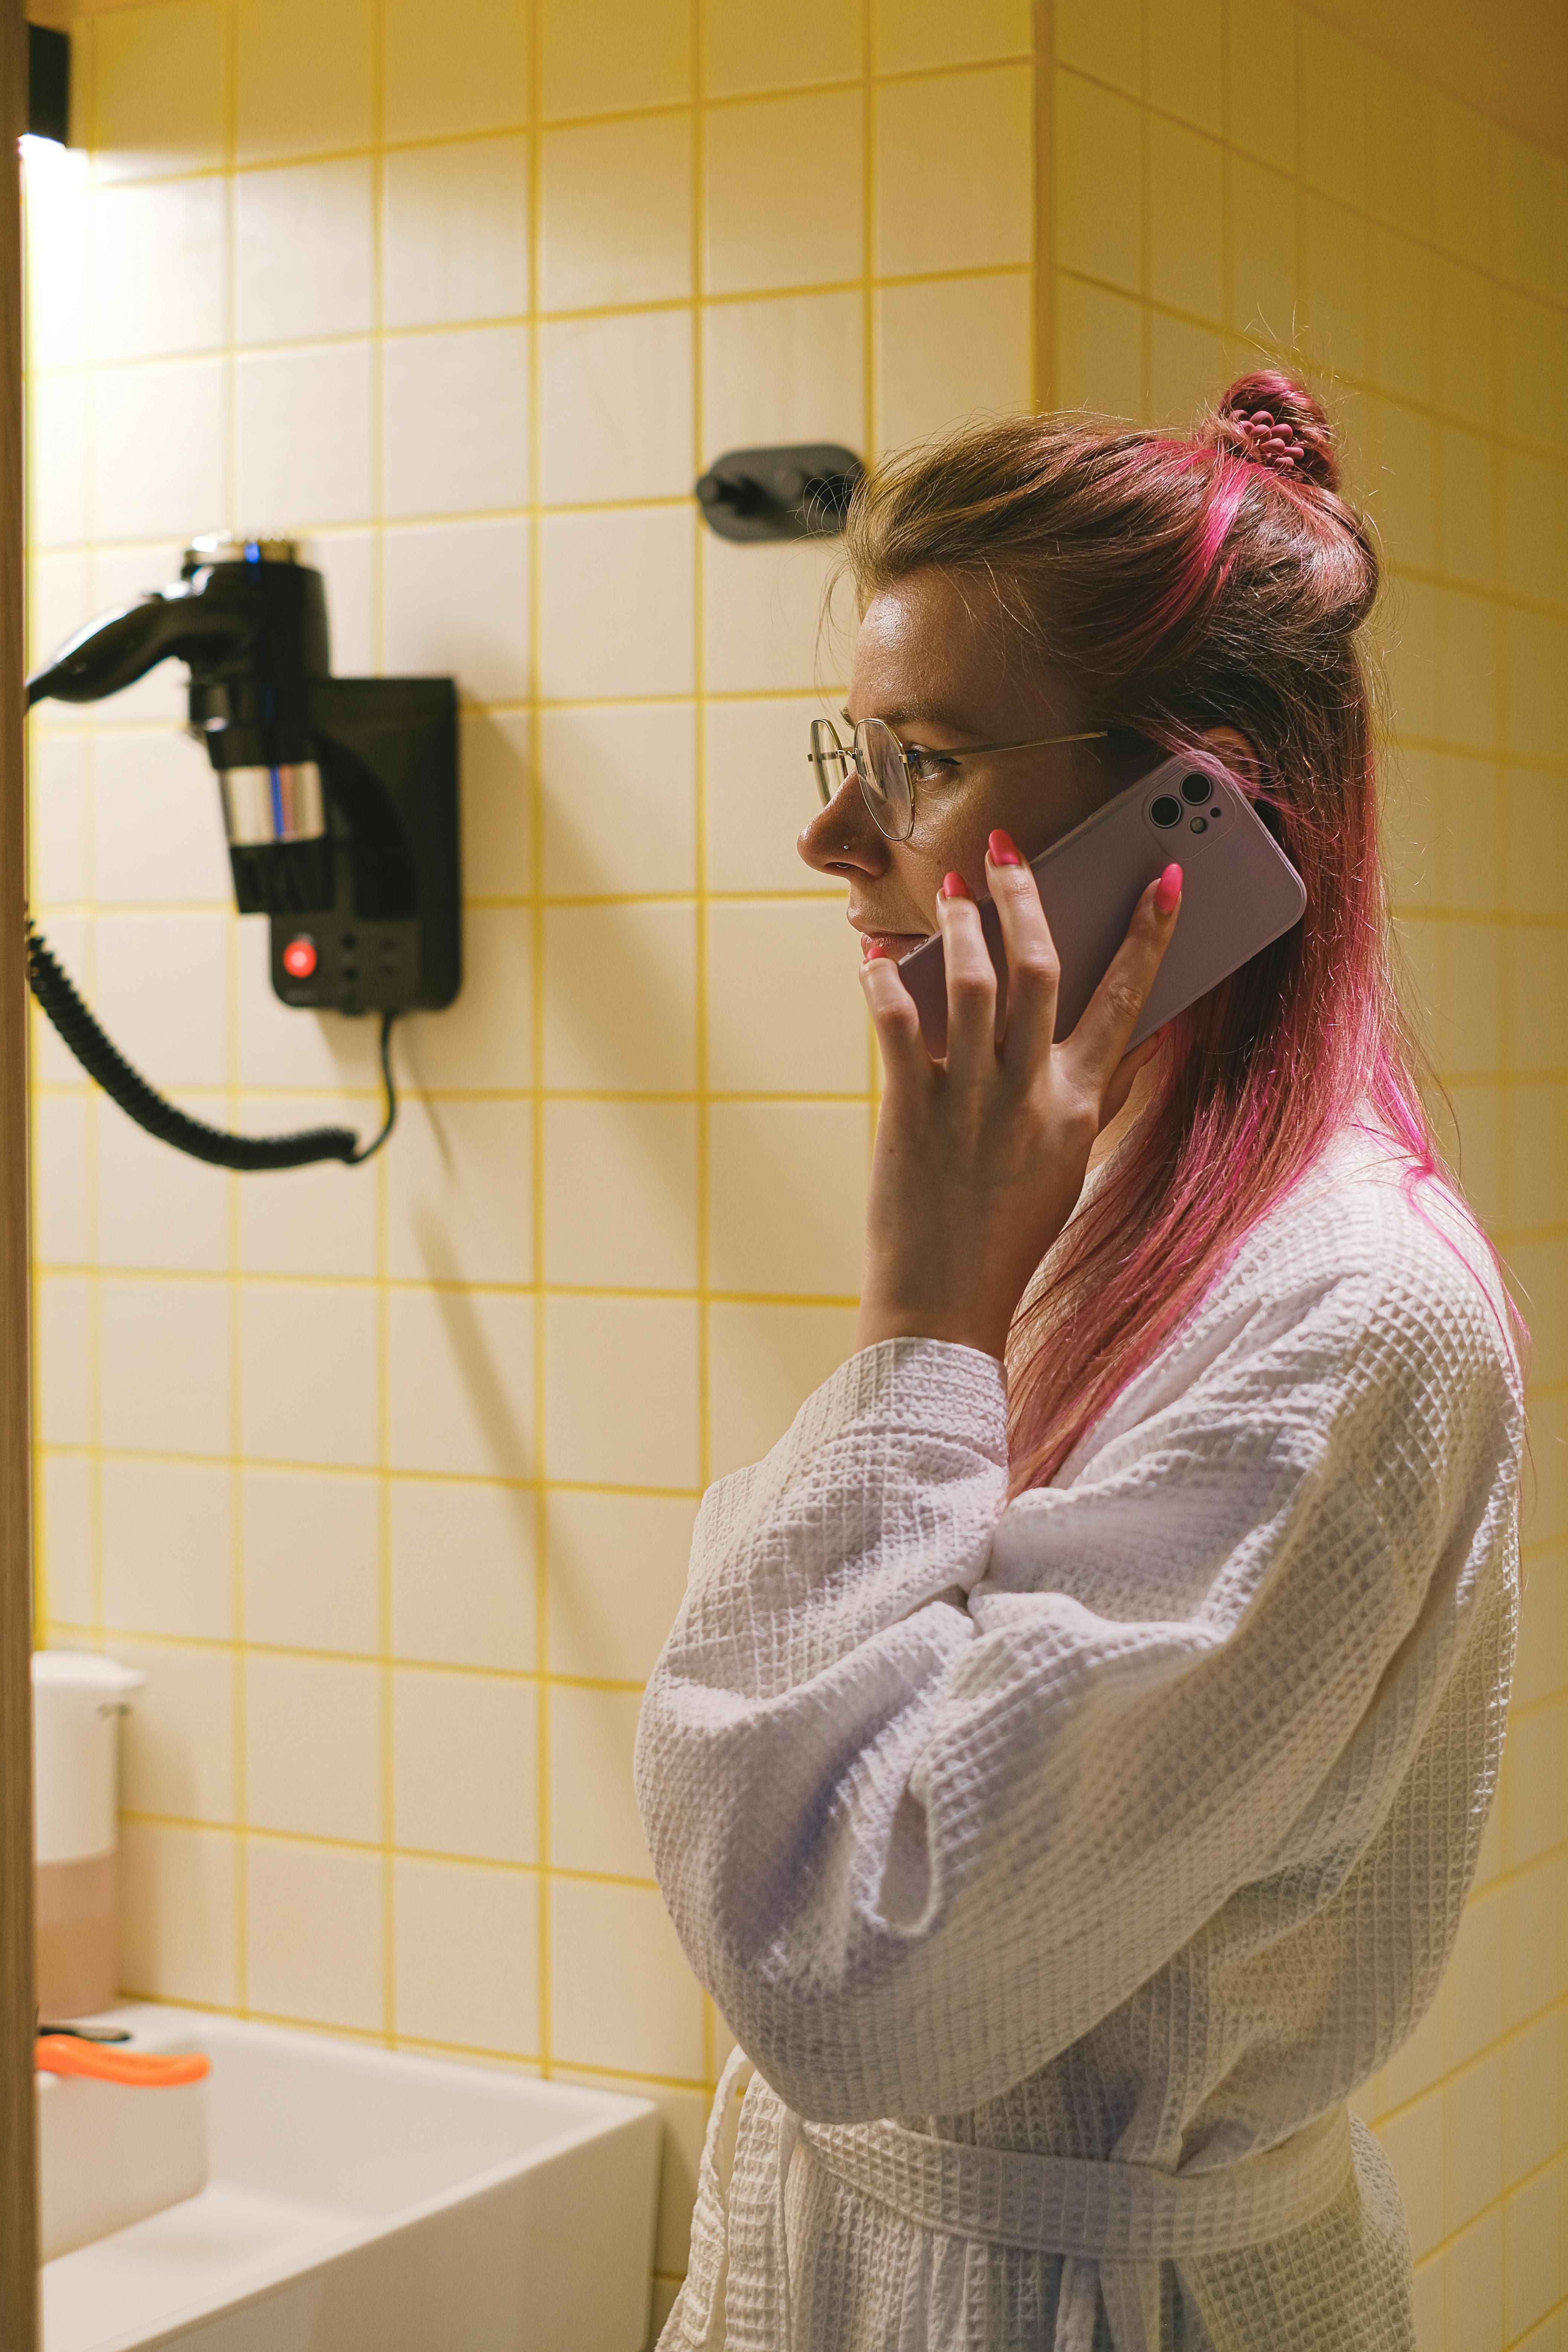 A woman talking on a phone in a bathroom | Source: Pexels